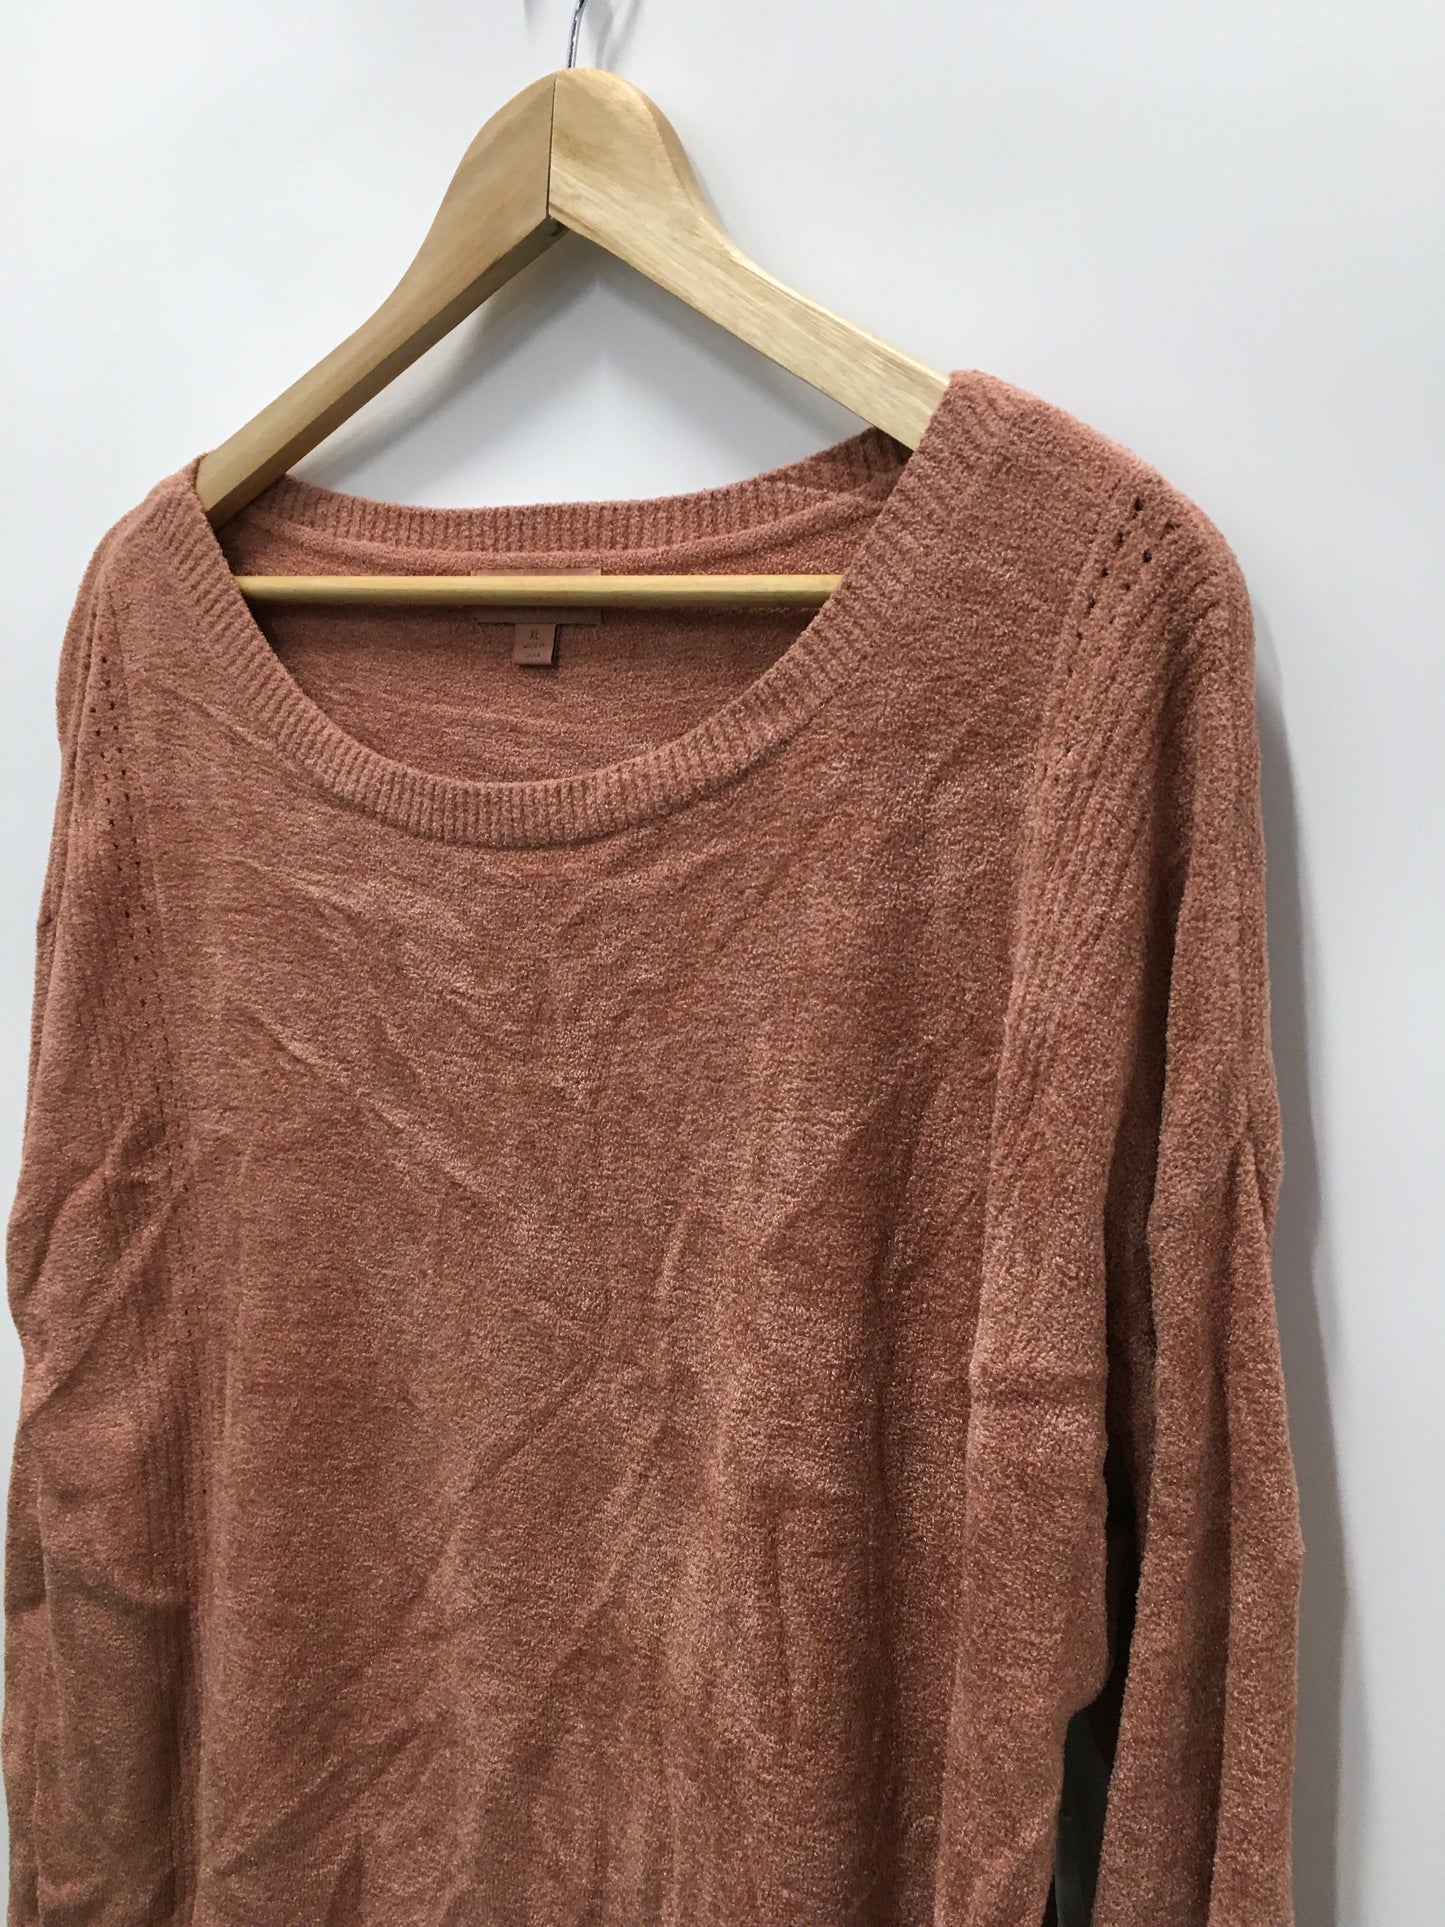 Rust Sweater Barefoot Dreams, Size Xl